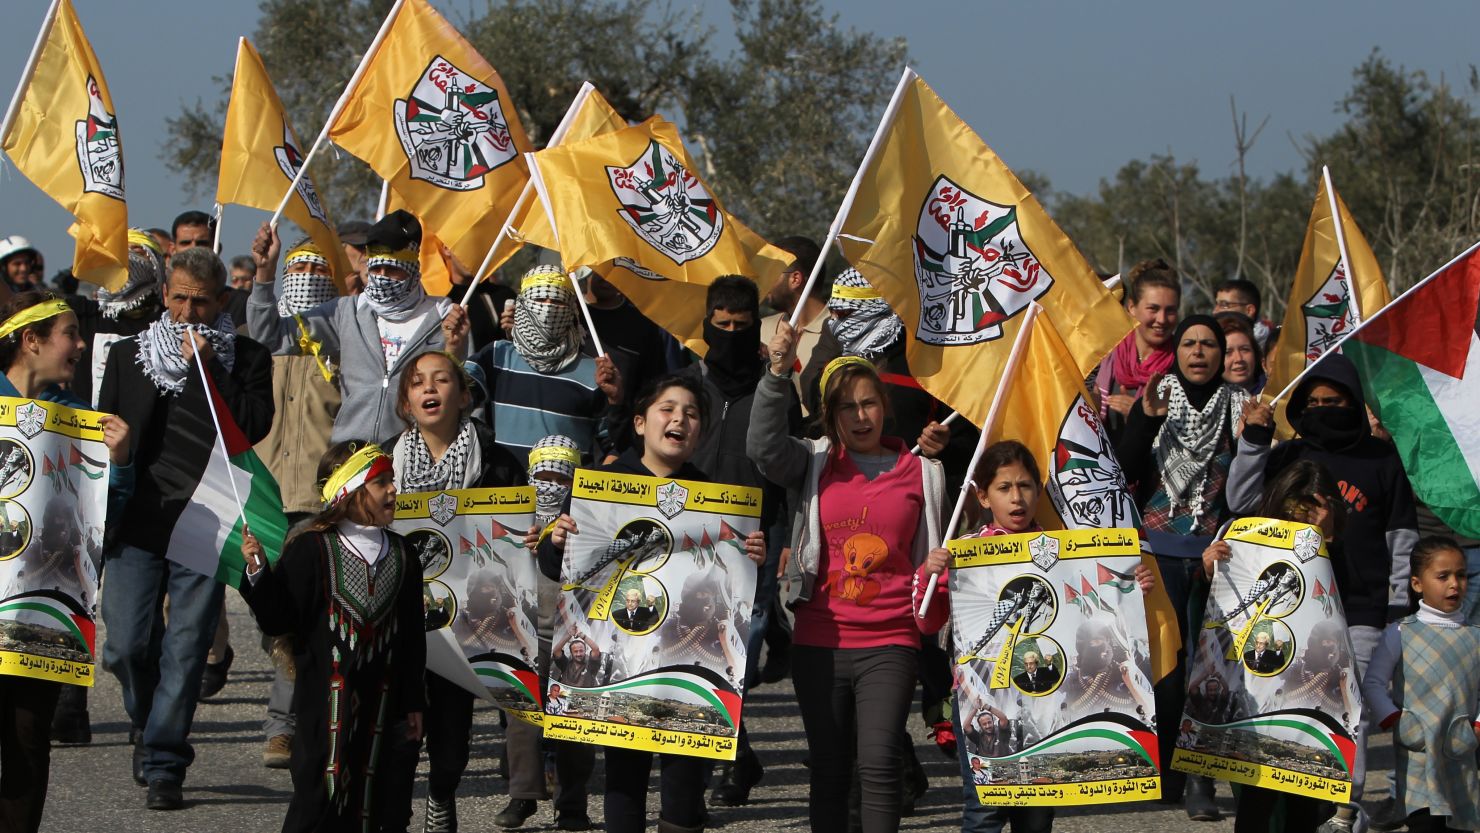 Palestinian protesters carry Fatah party flags during a march organised by residents of the West Bank village Nabi Saleh.